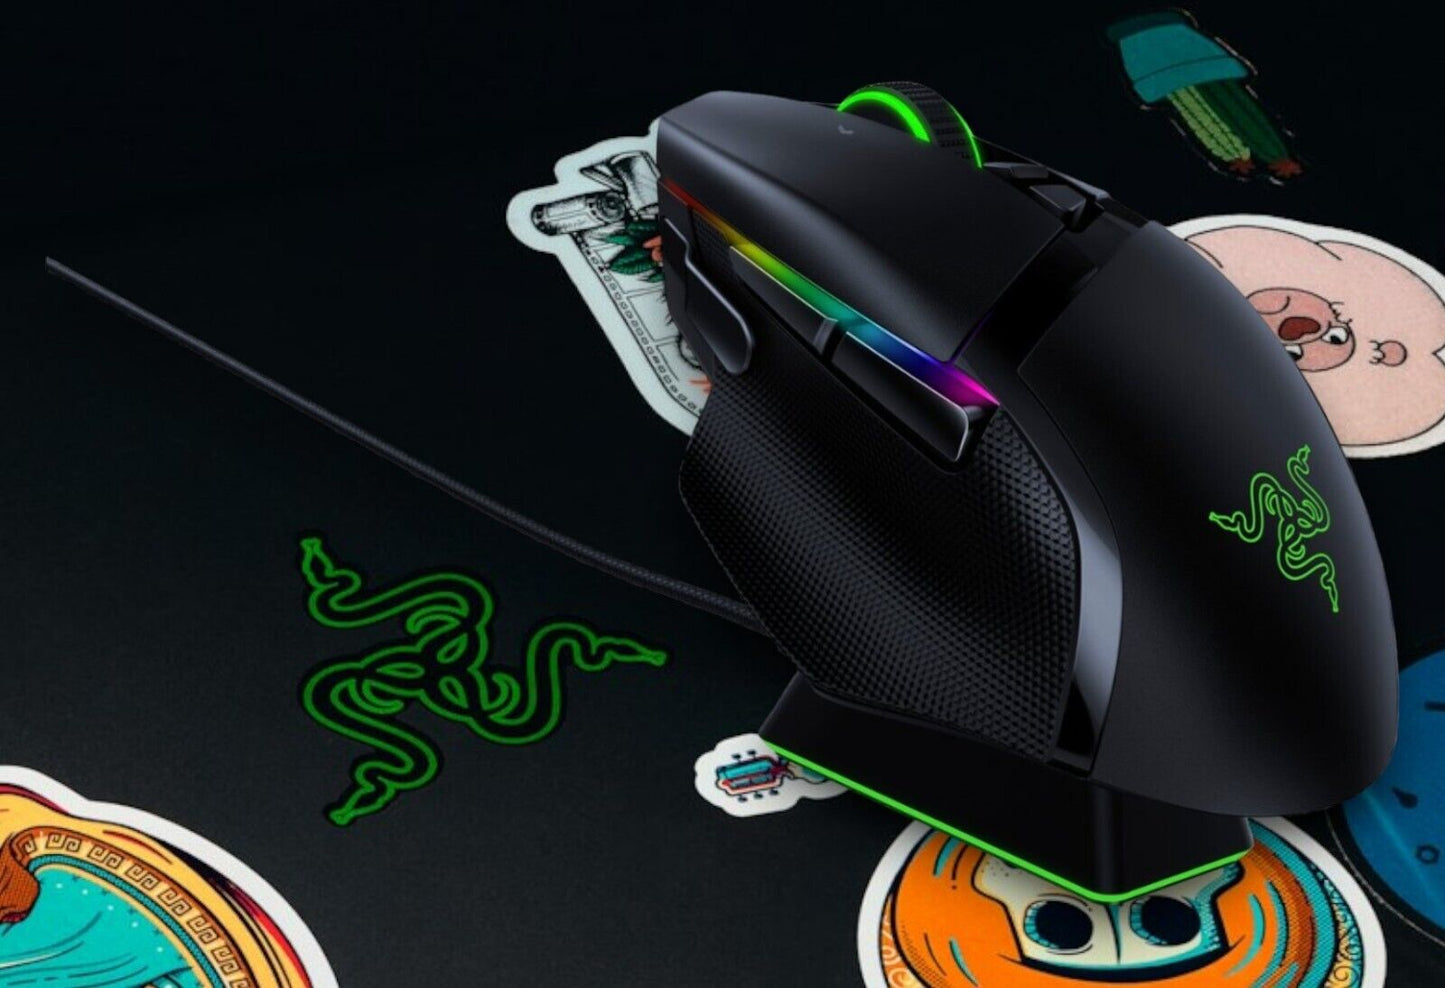 Razer - Basilisk Ultimate Wireless Optical with HyperSpeed Technology and Charging Dock Gaming Mouse - Black - Ricky's Garage